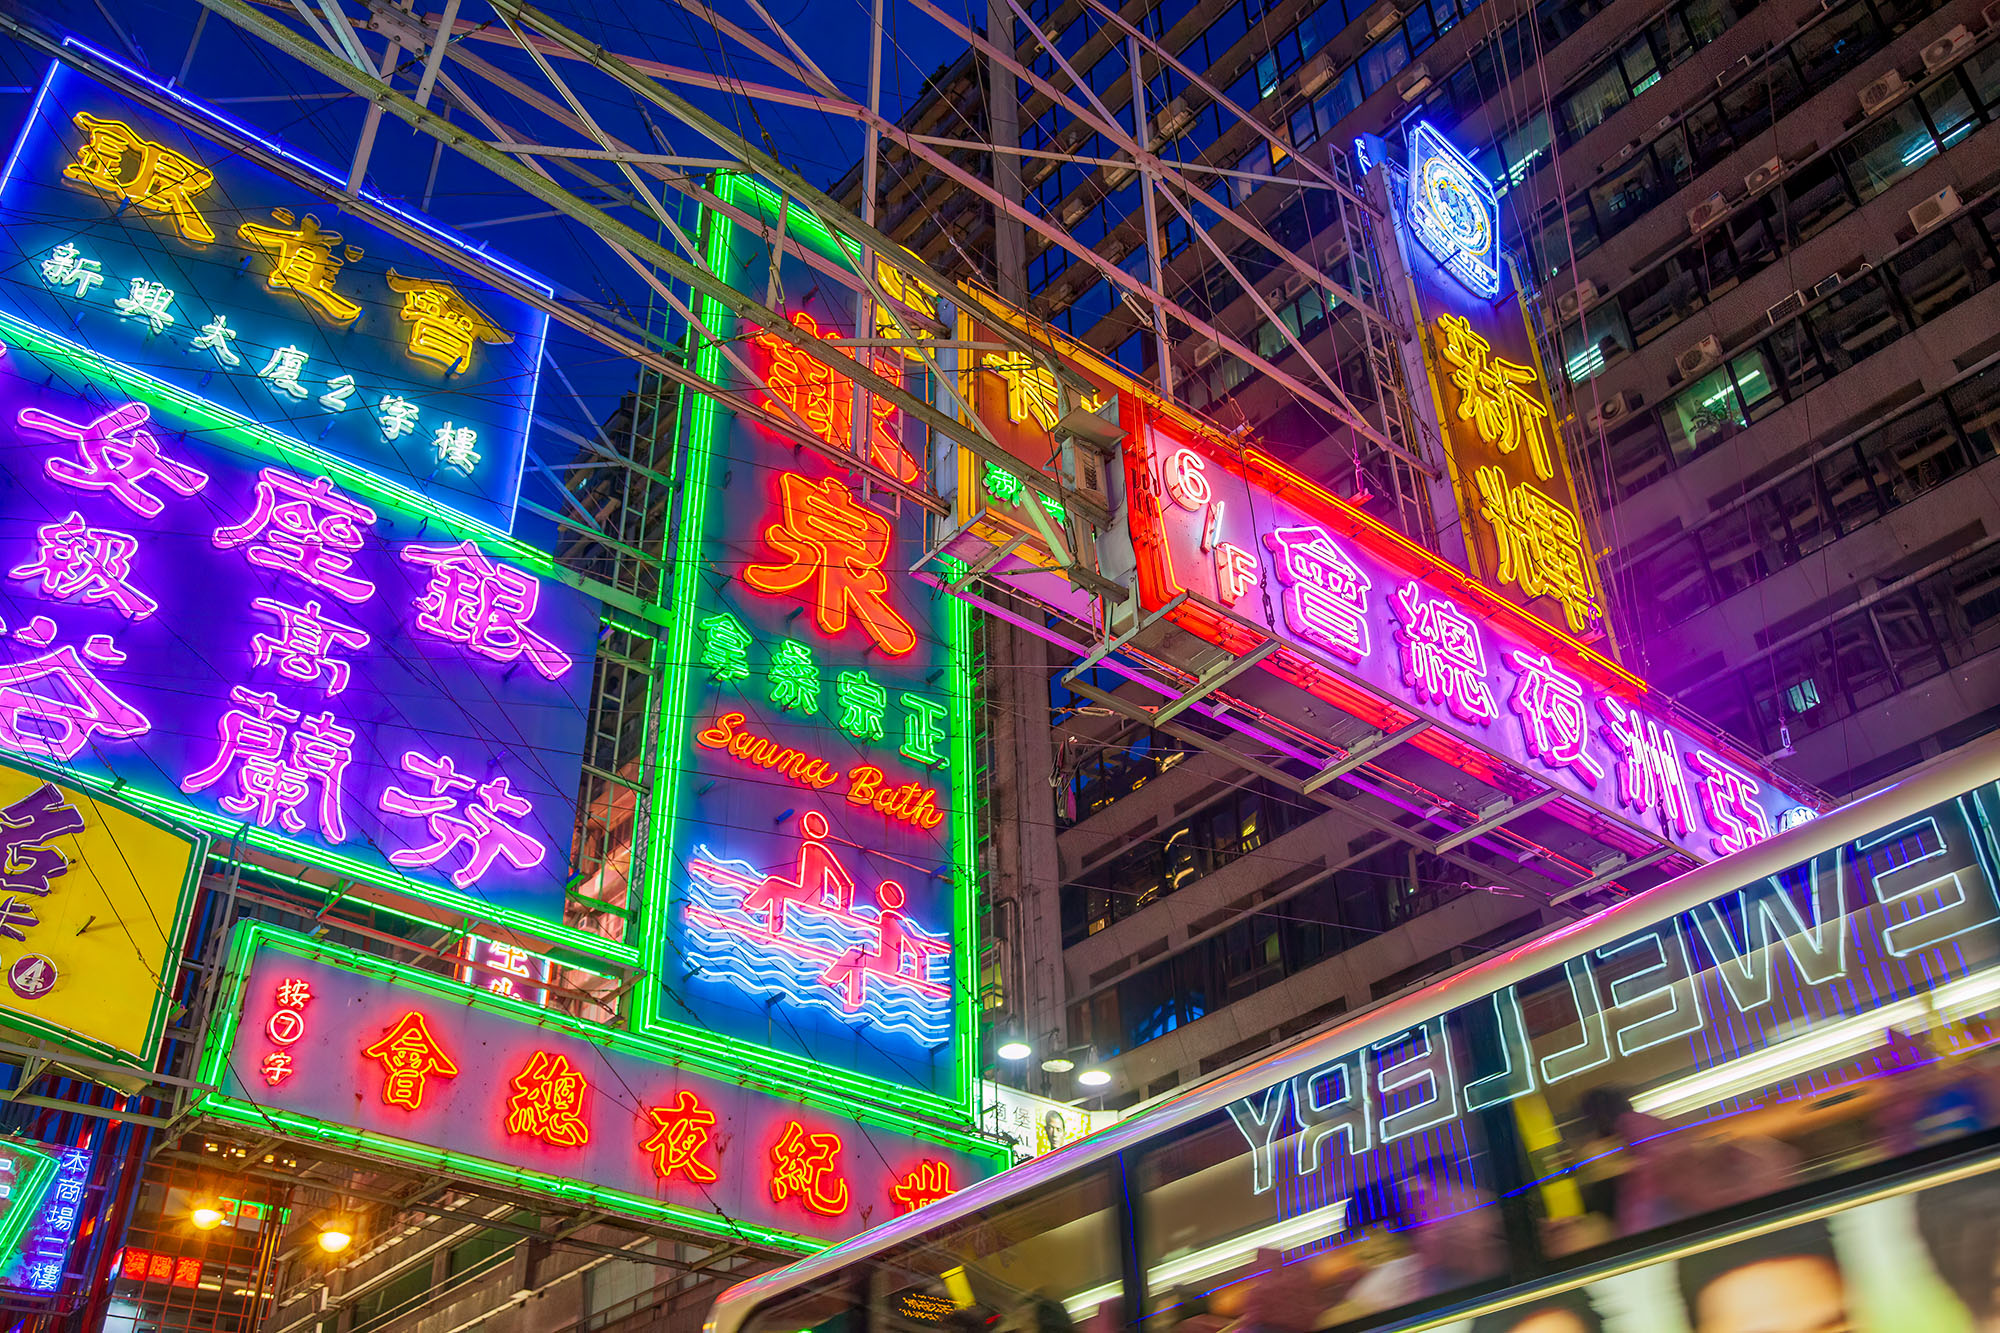 In the bustling streets of Hong Kong, this photograph captures a mesmerizing sight. Neon signs, adorned with vibrant Chinese...